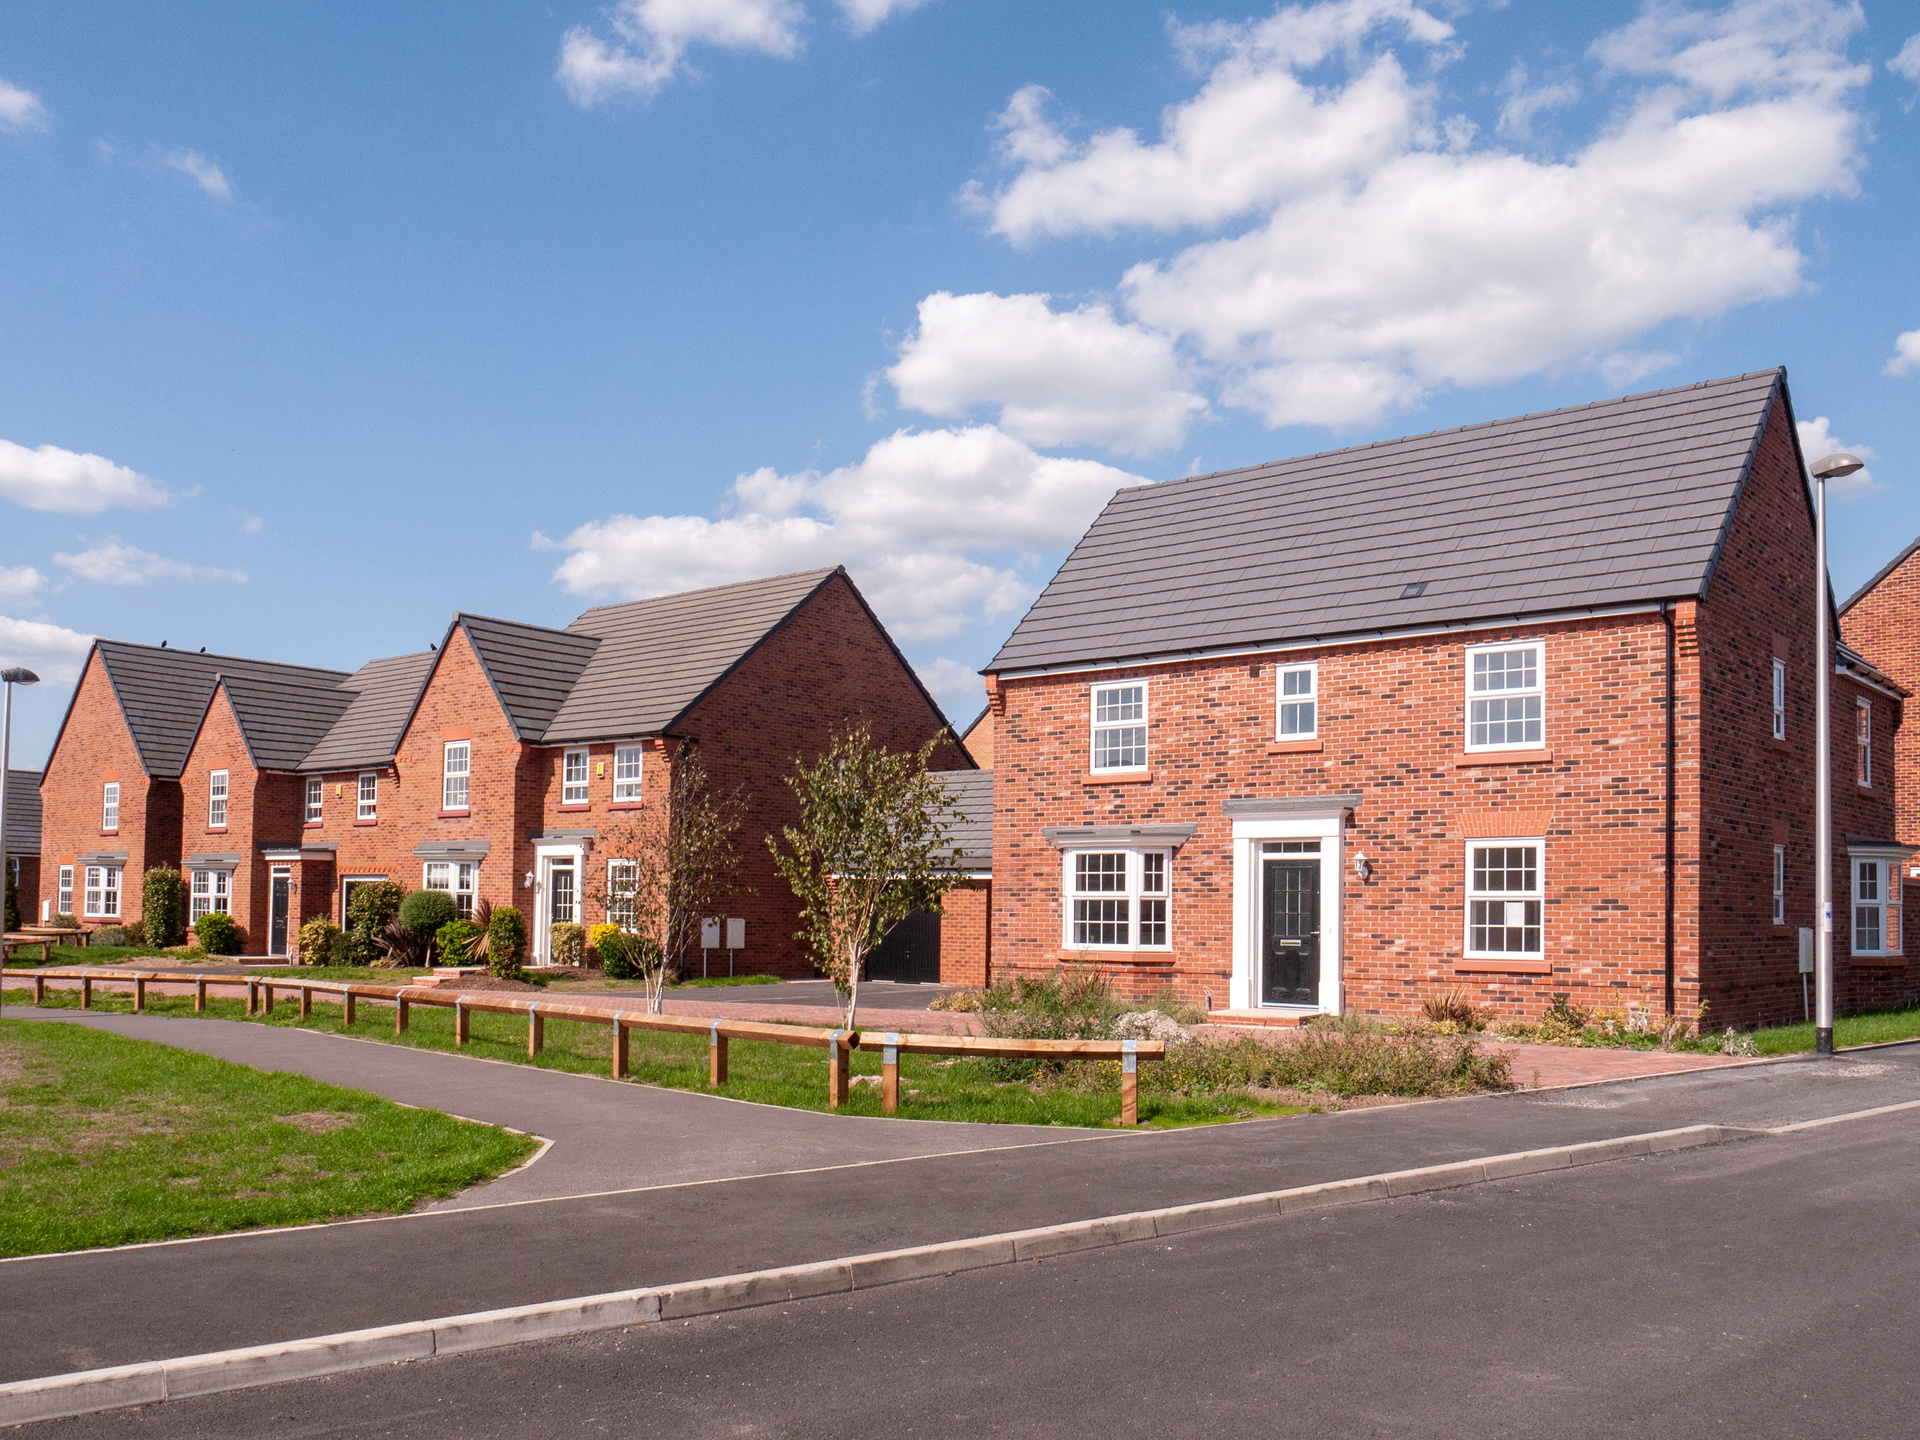 A row of new build, detached, brick houses, with a green and walkway in front; our Conveyancing Solicitors in Lytham discuss new build property ownership and how we can help.